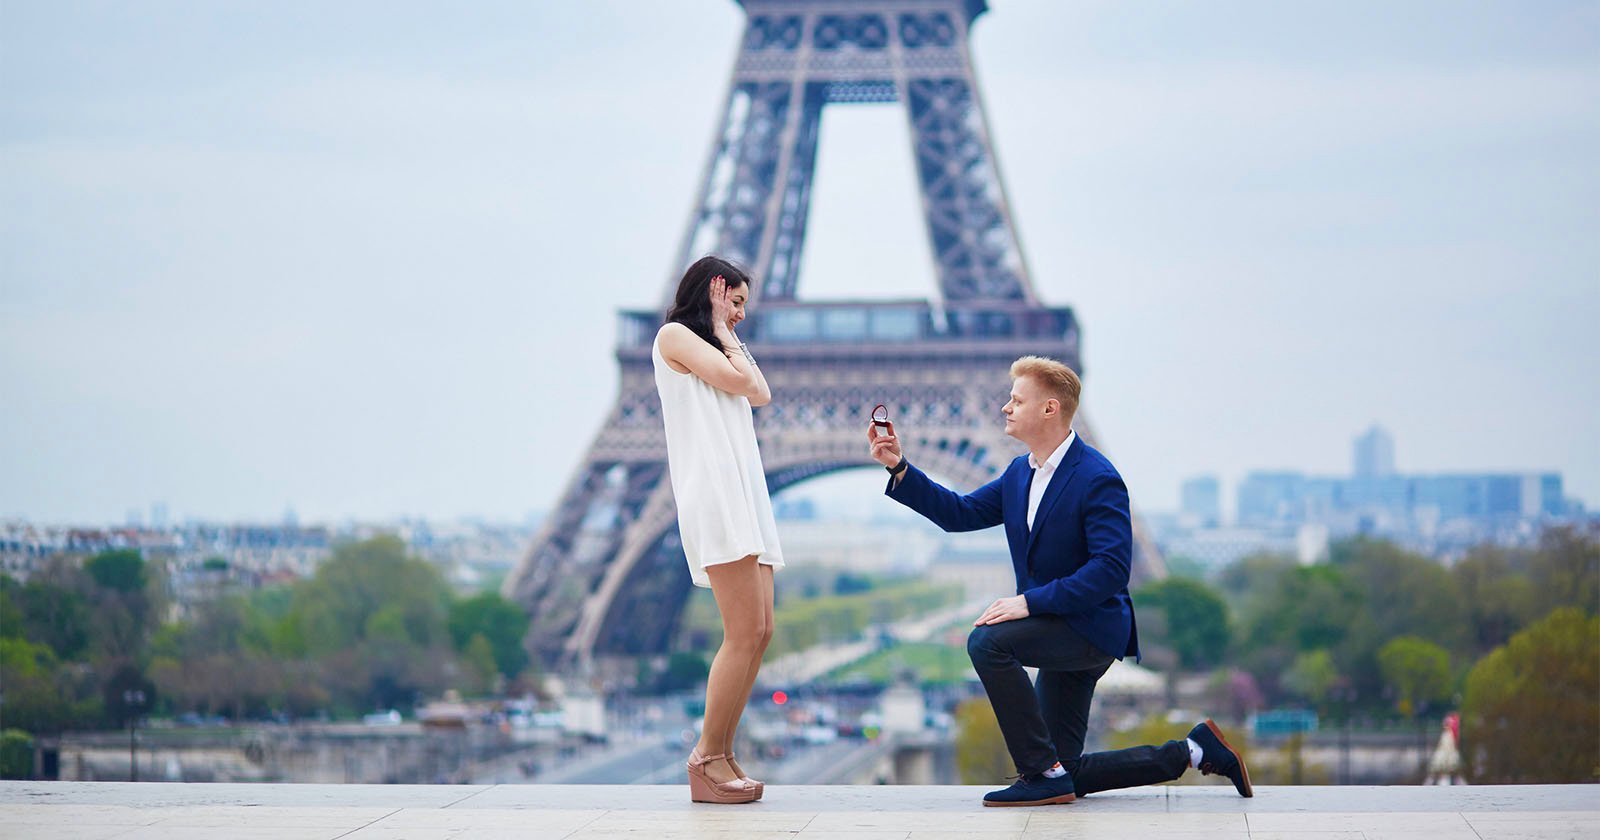 Business is Booming for Parisian Proposal Photographers